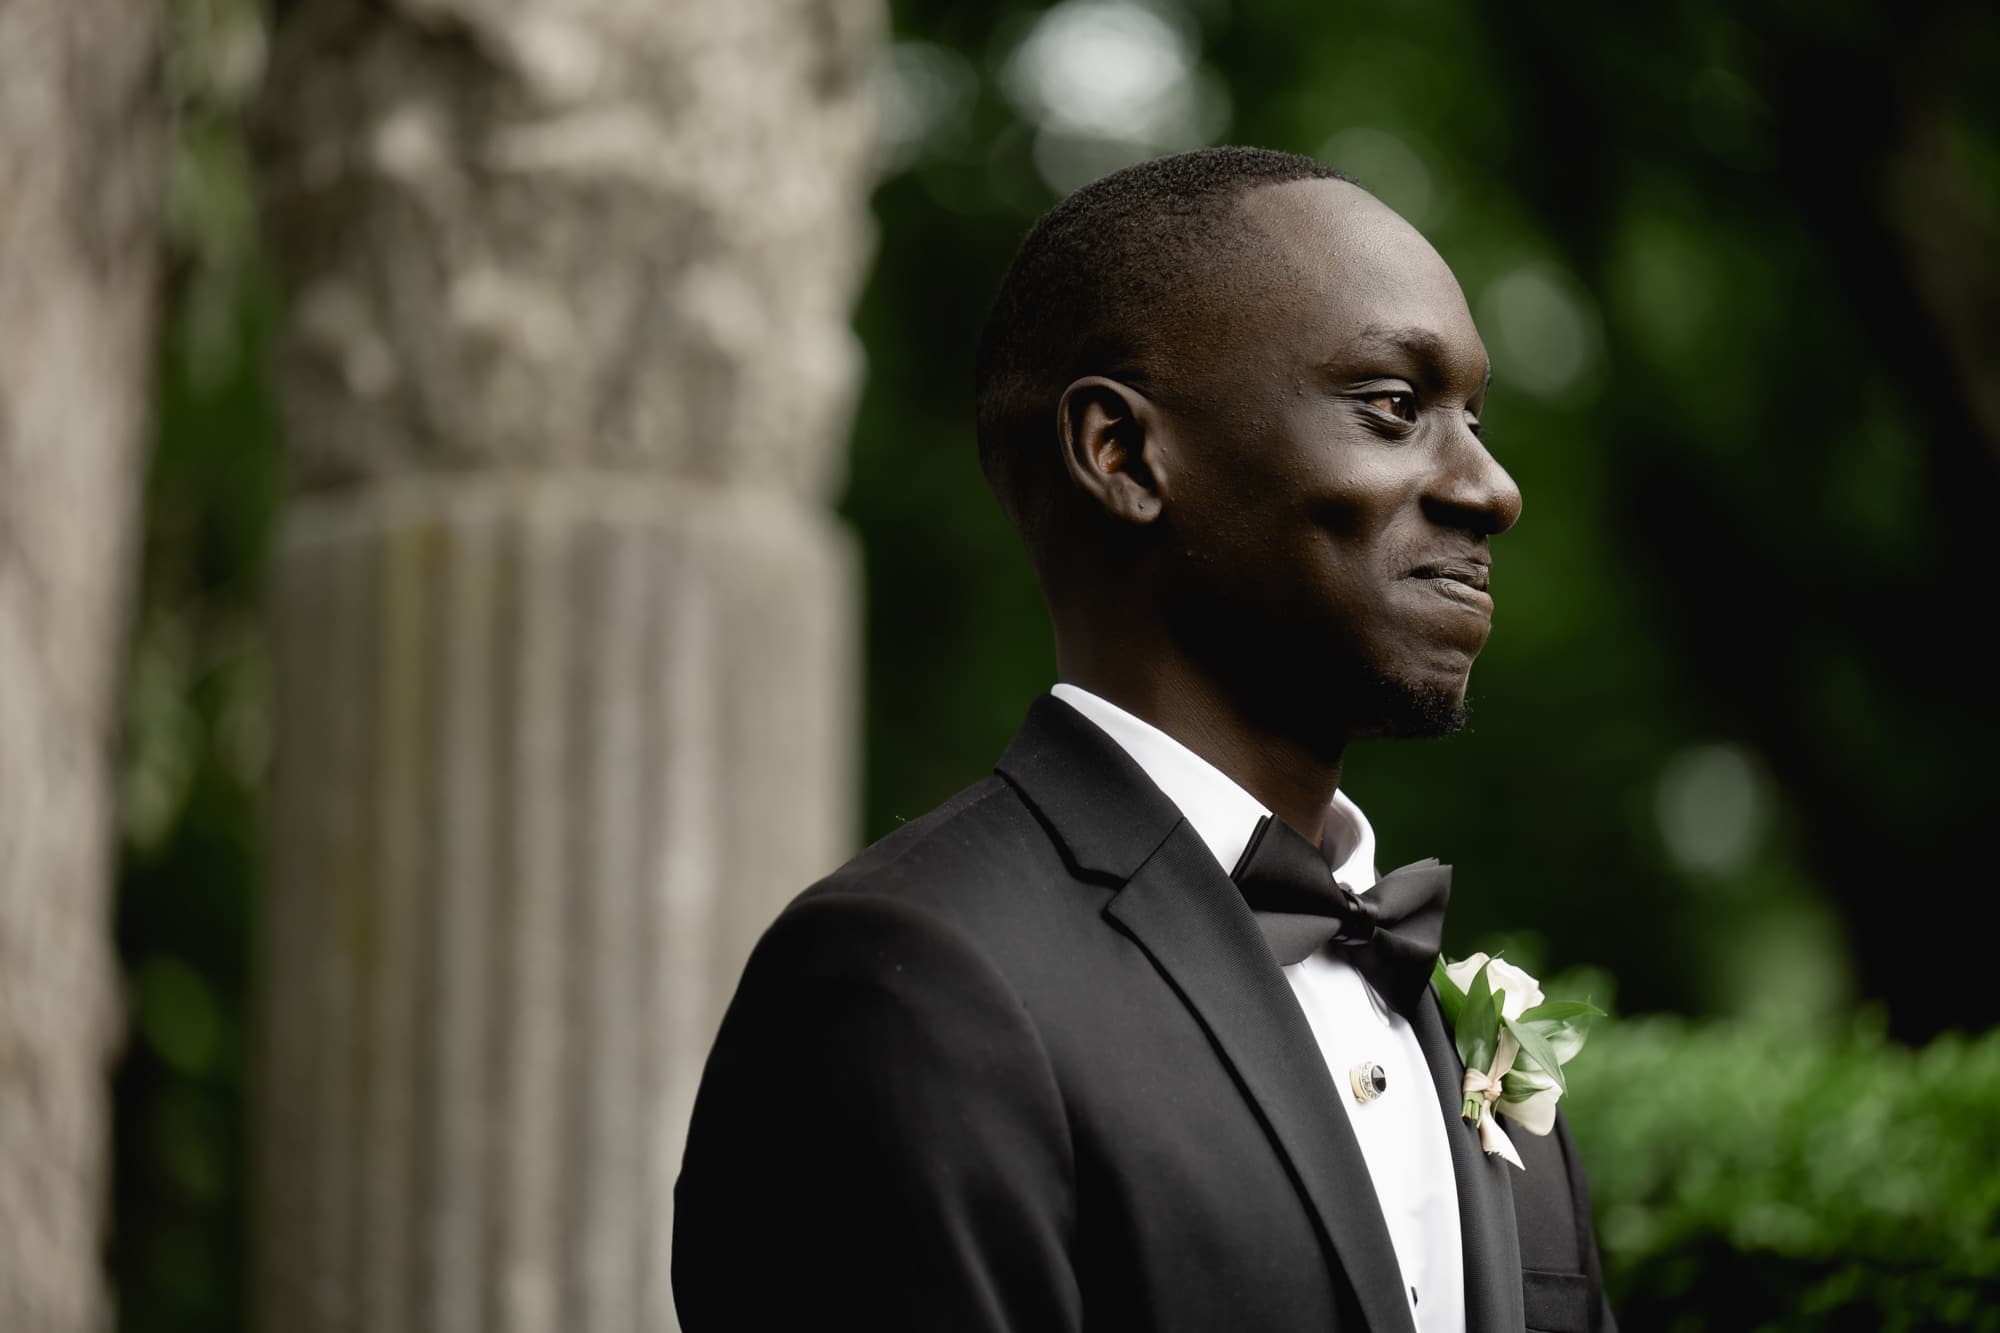 Groom smiling at bride as she walks down the aisle